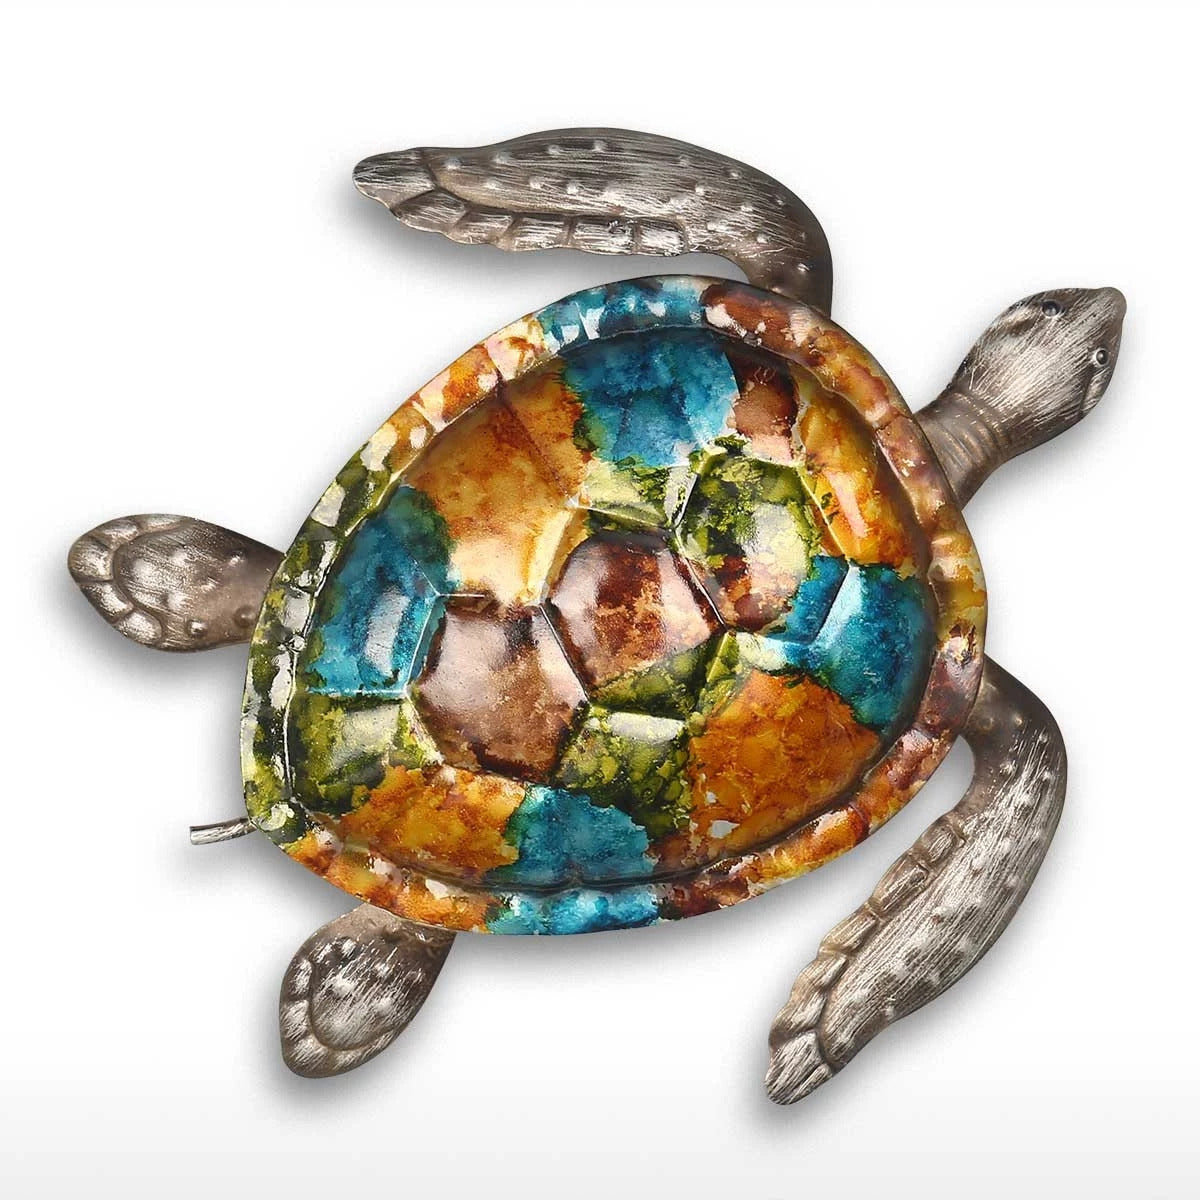 Cute and Baby Sea Turtle Wall Art Decor by Metal Ocean Figurines – The  Sweet Home Make